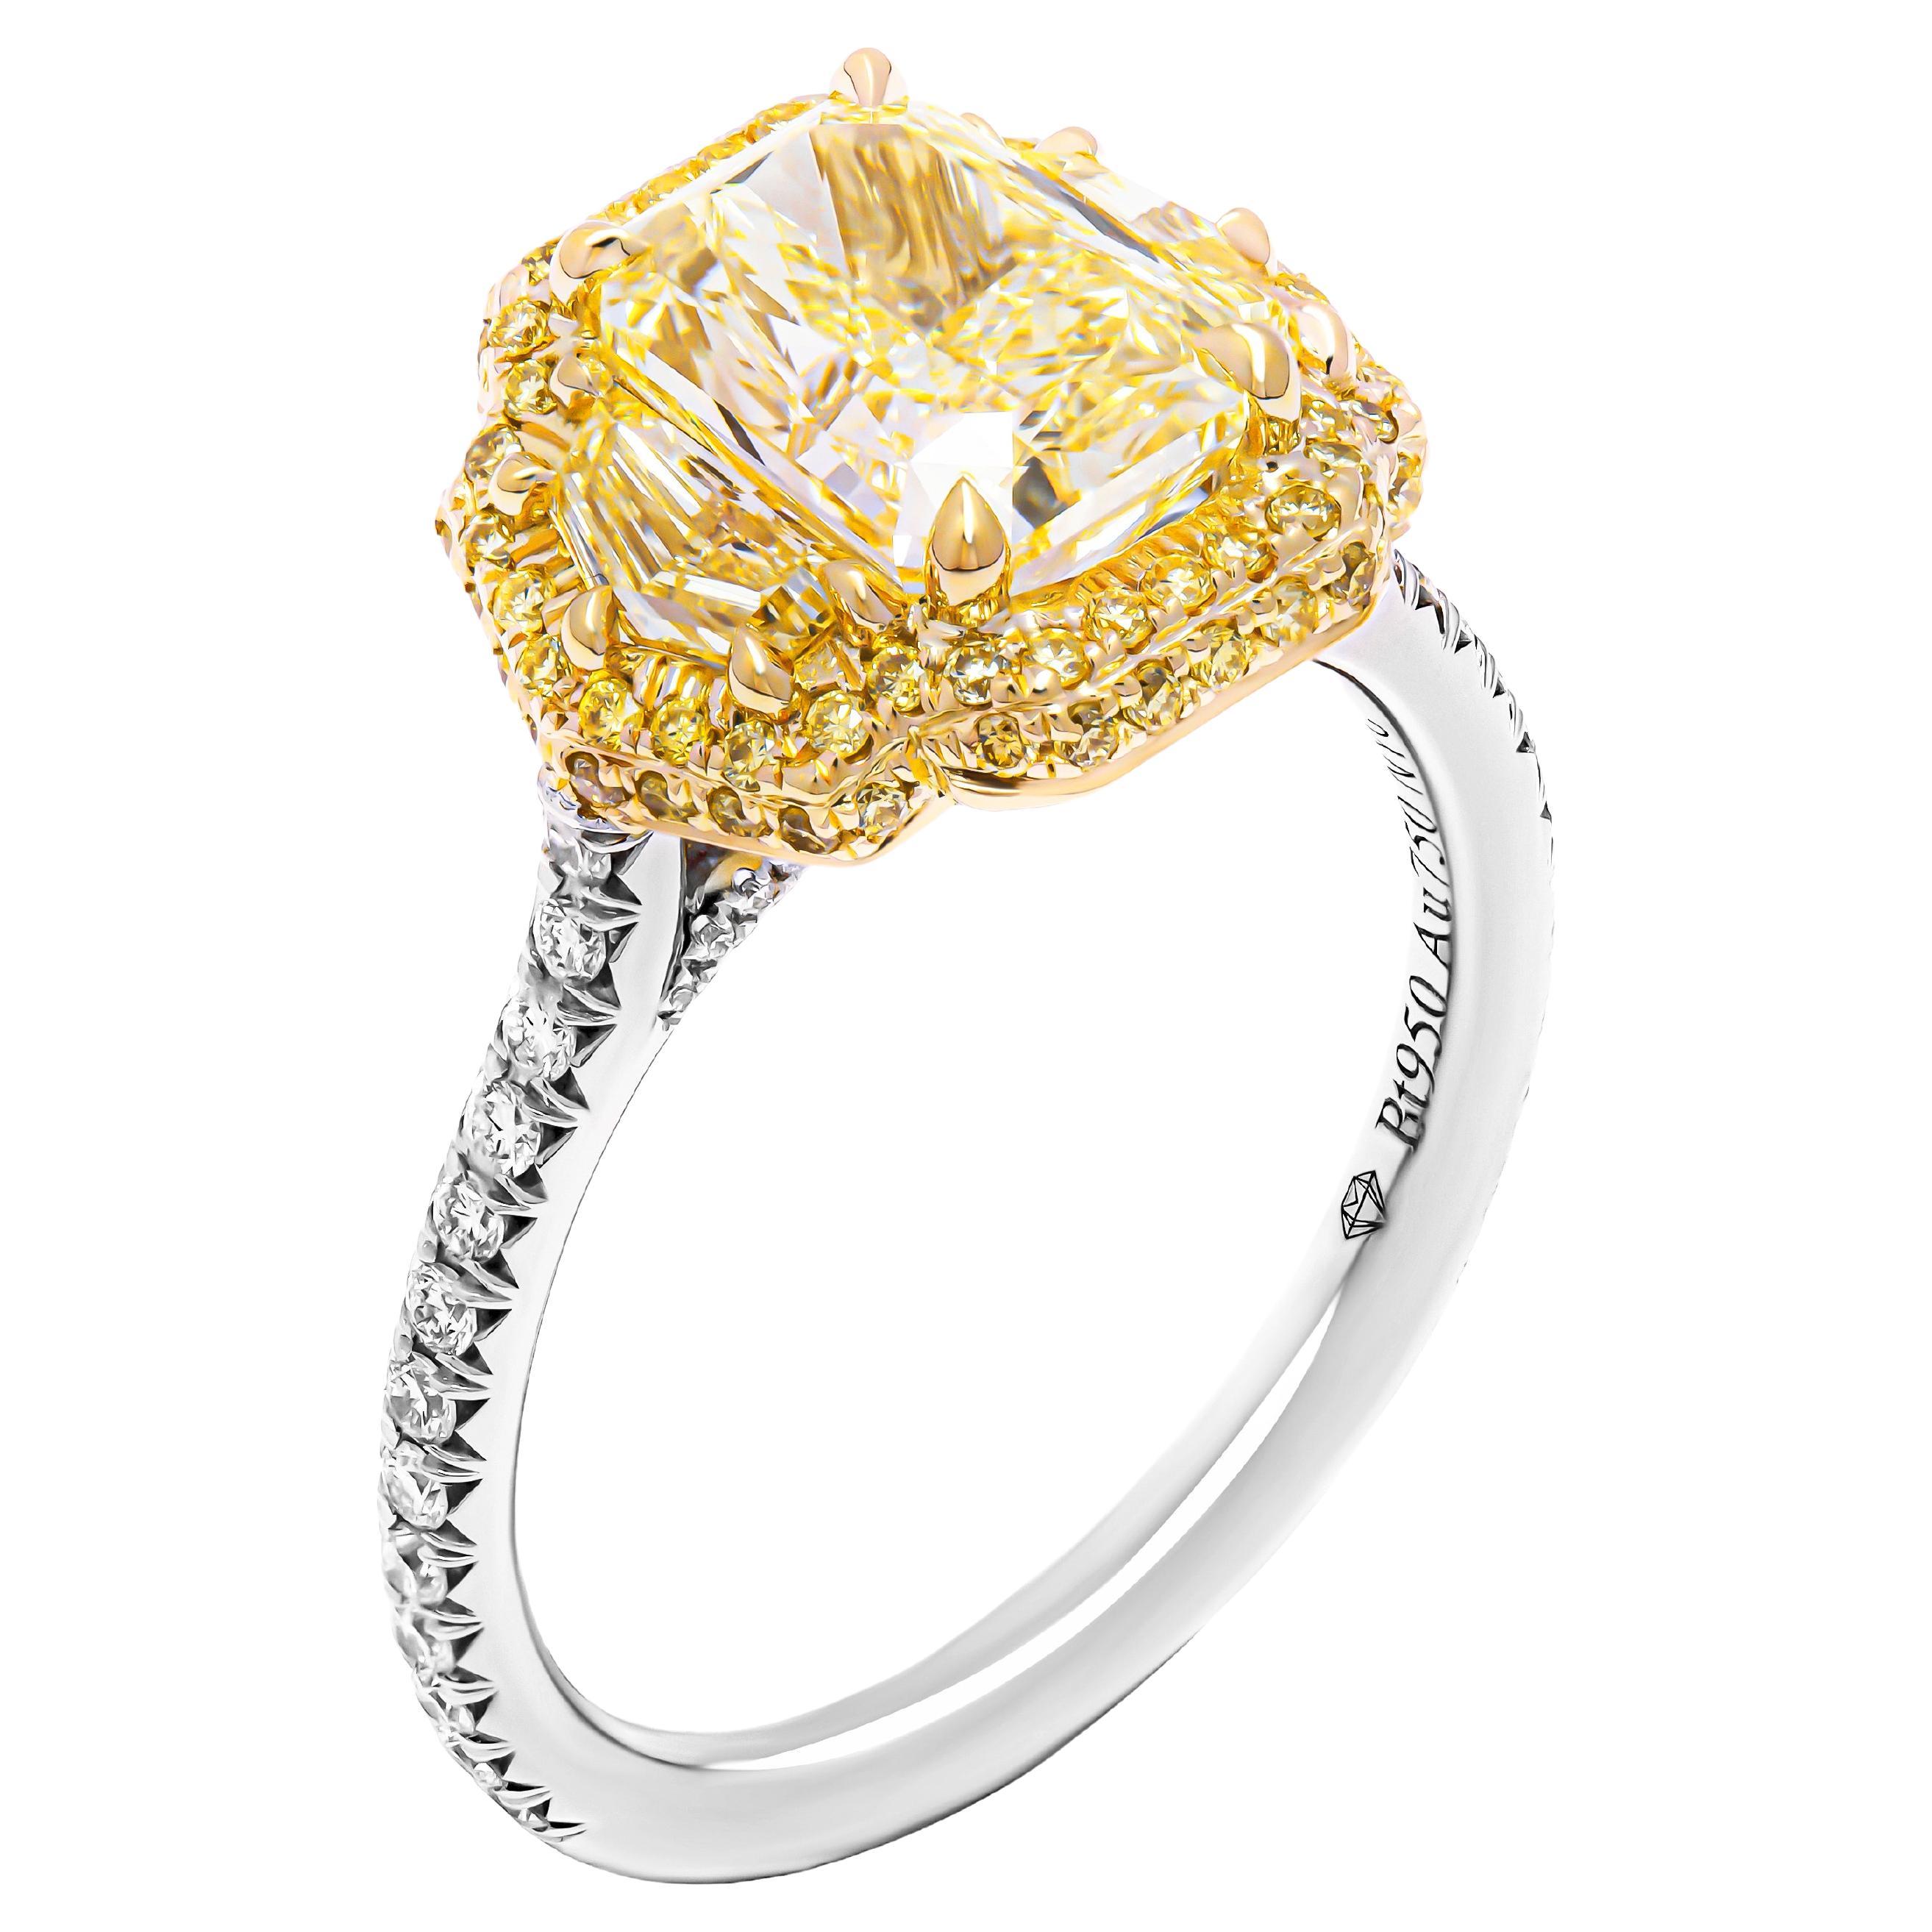 GIA Certified 3 Stone Ring with 2.14ct Fancy Light Yellow Radiant